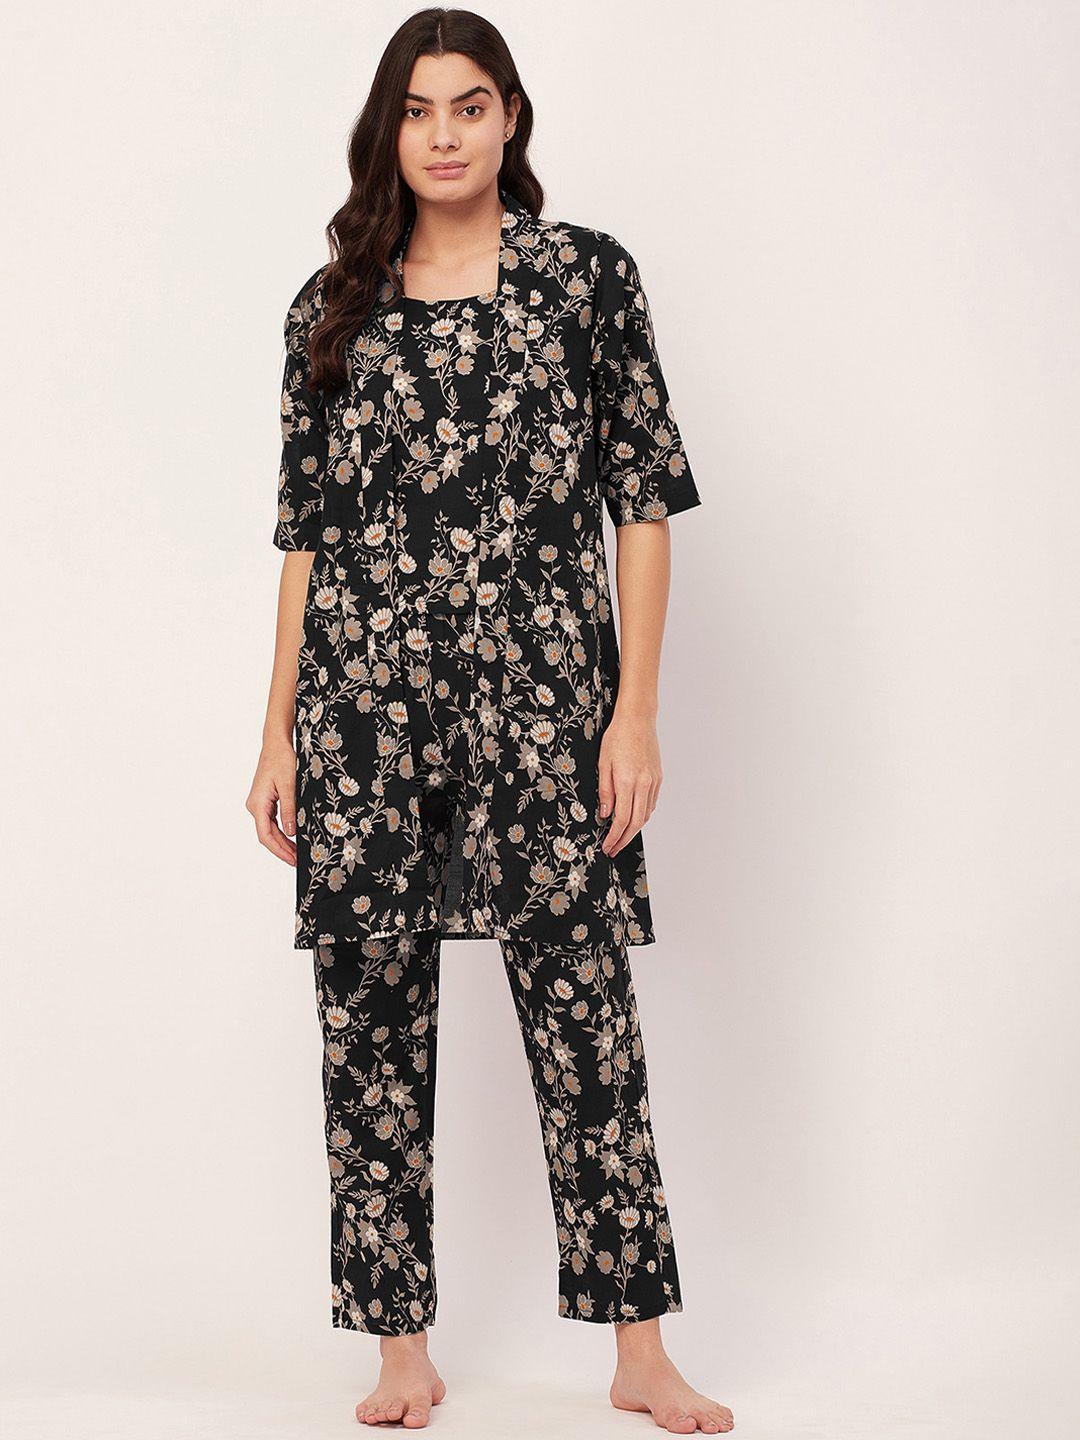 moomaya floral printed pure cotton night suit